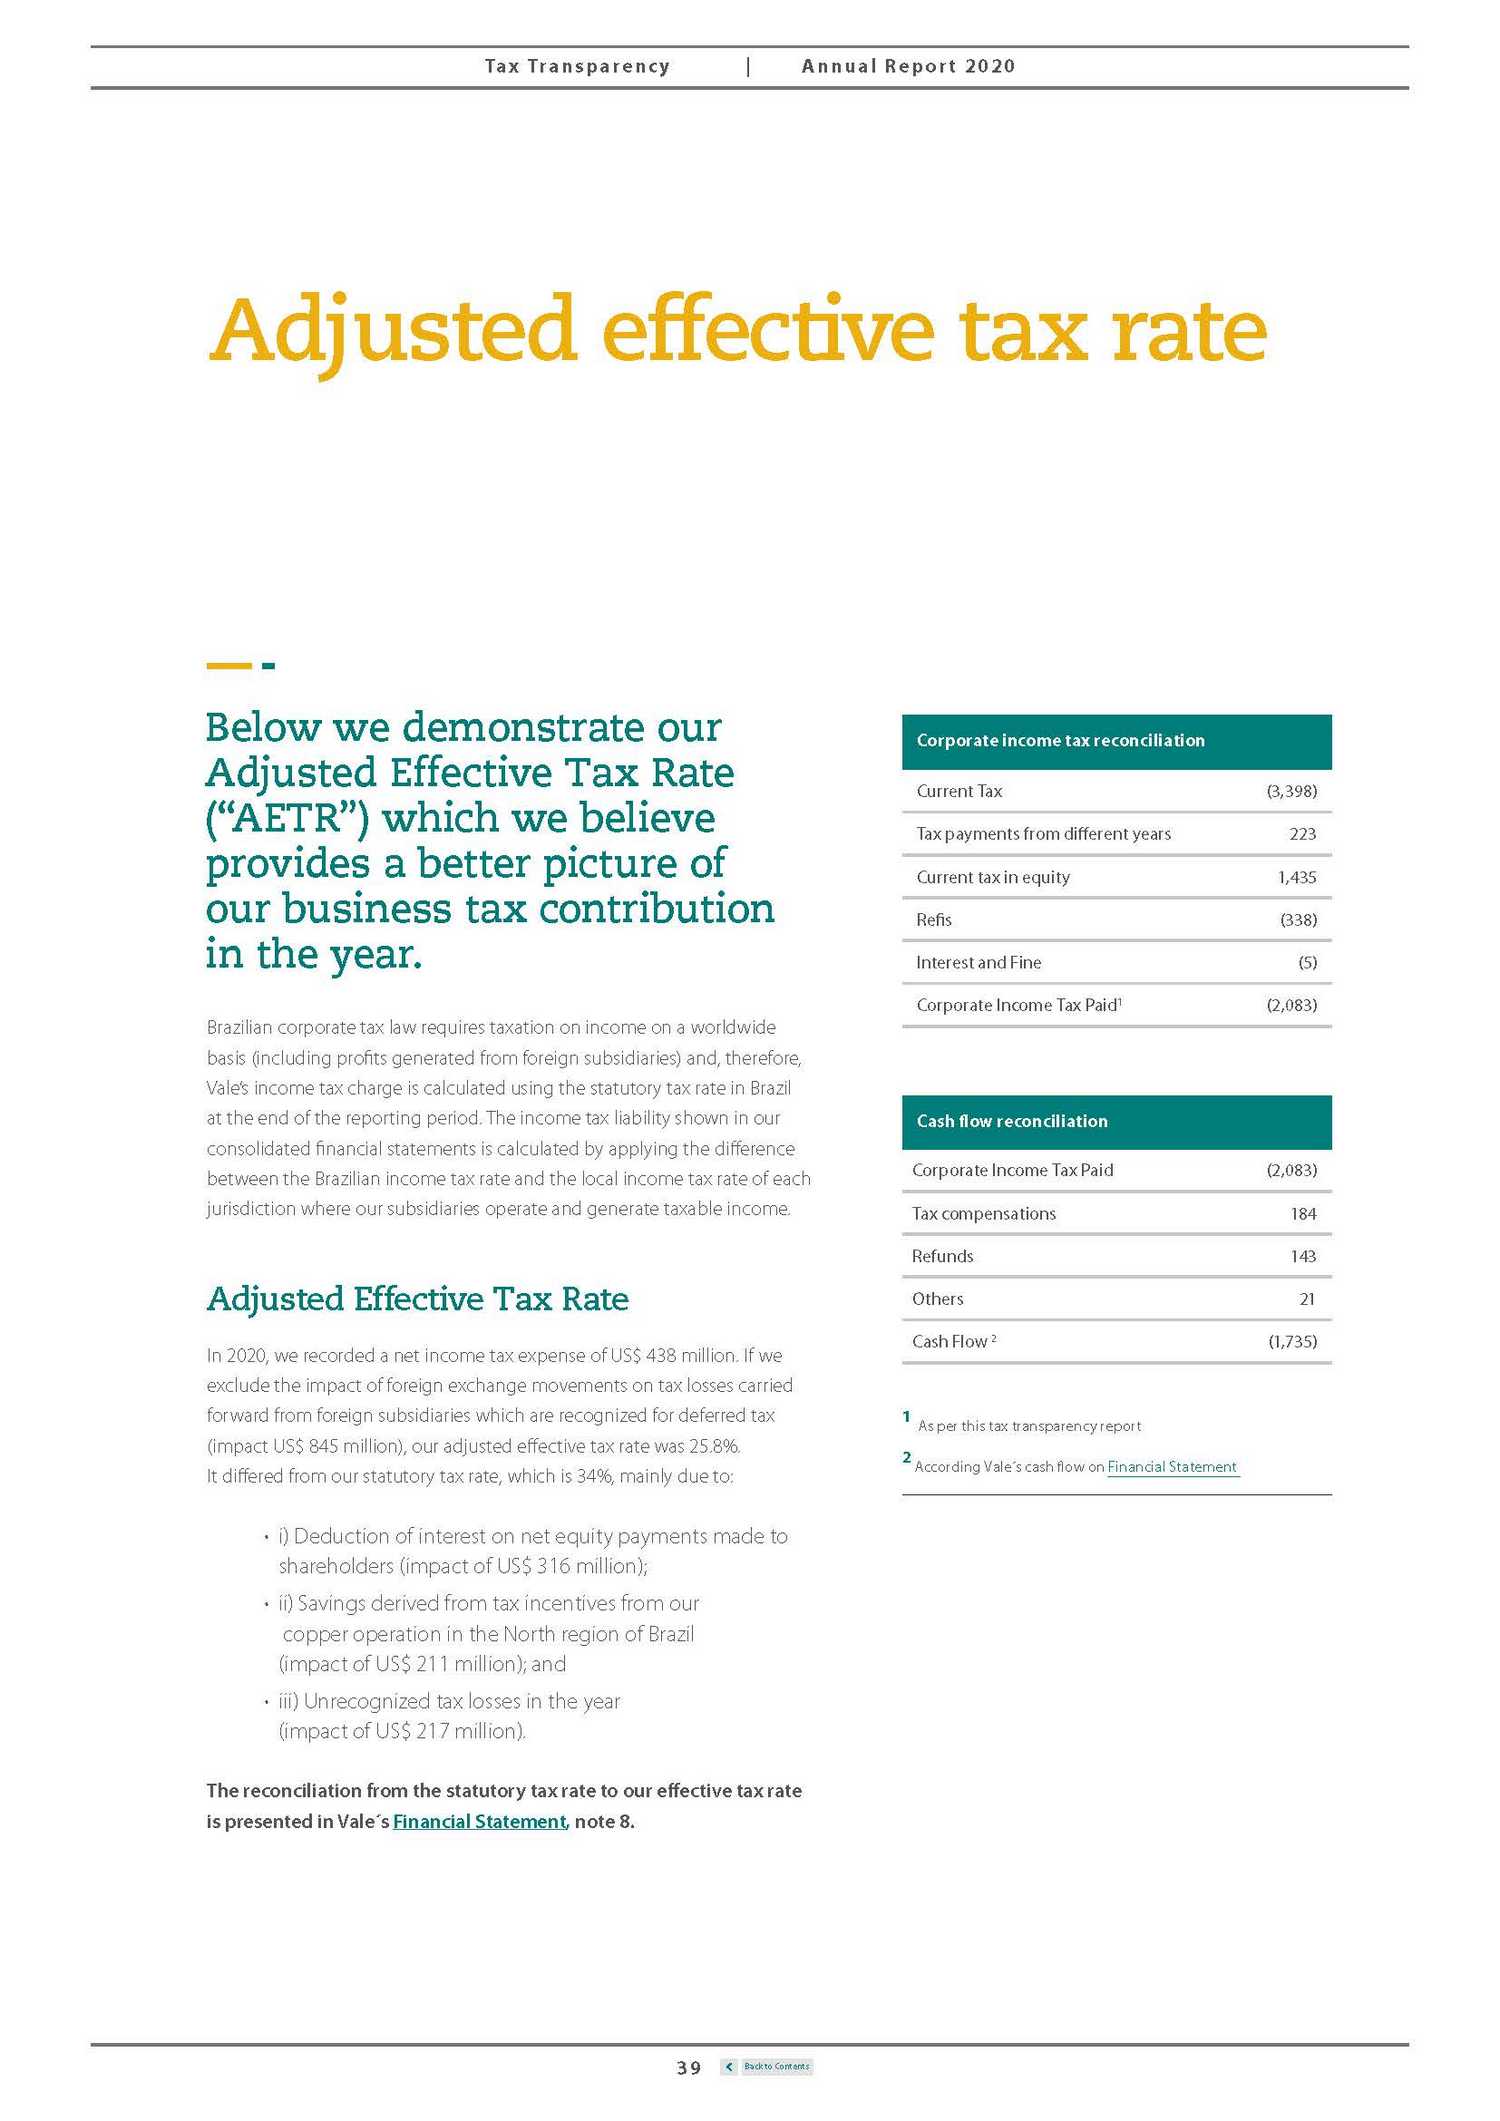 17996-1-mm_tax transparency report vale 2020_page_39.jpg